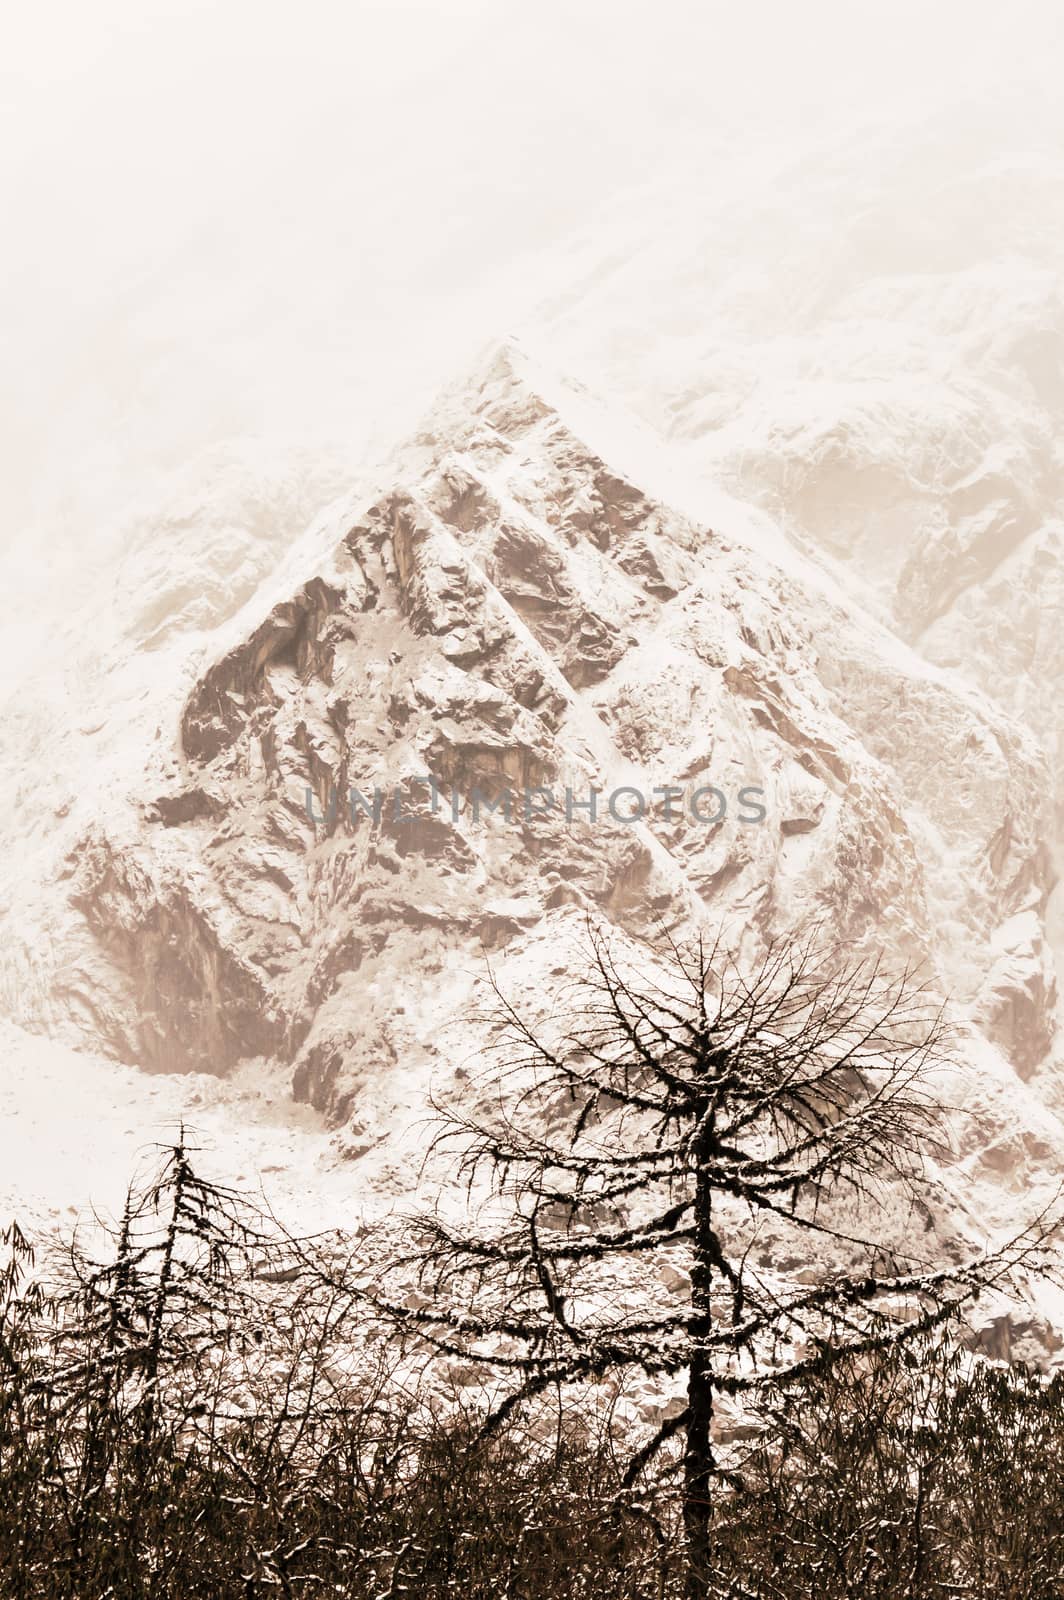 Majestic white spruces glowing by sunlight. Trees covered with white fluffy snow frosty on a beautiful day, among high mountains. Rural landscape early in morning on very cold winter day. by sudiptabhowmick